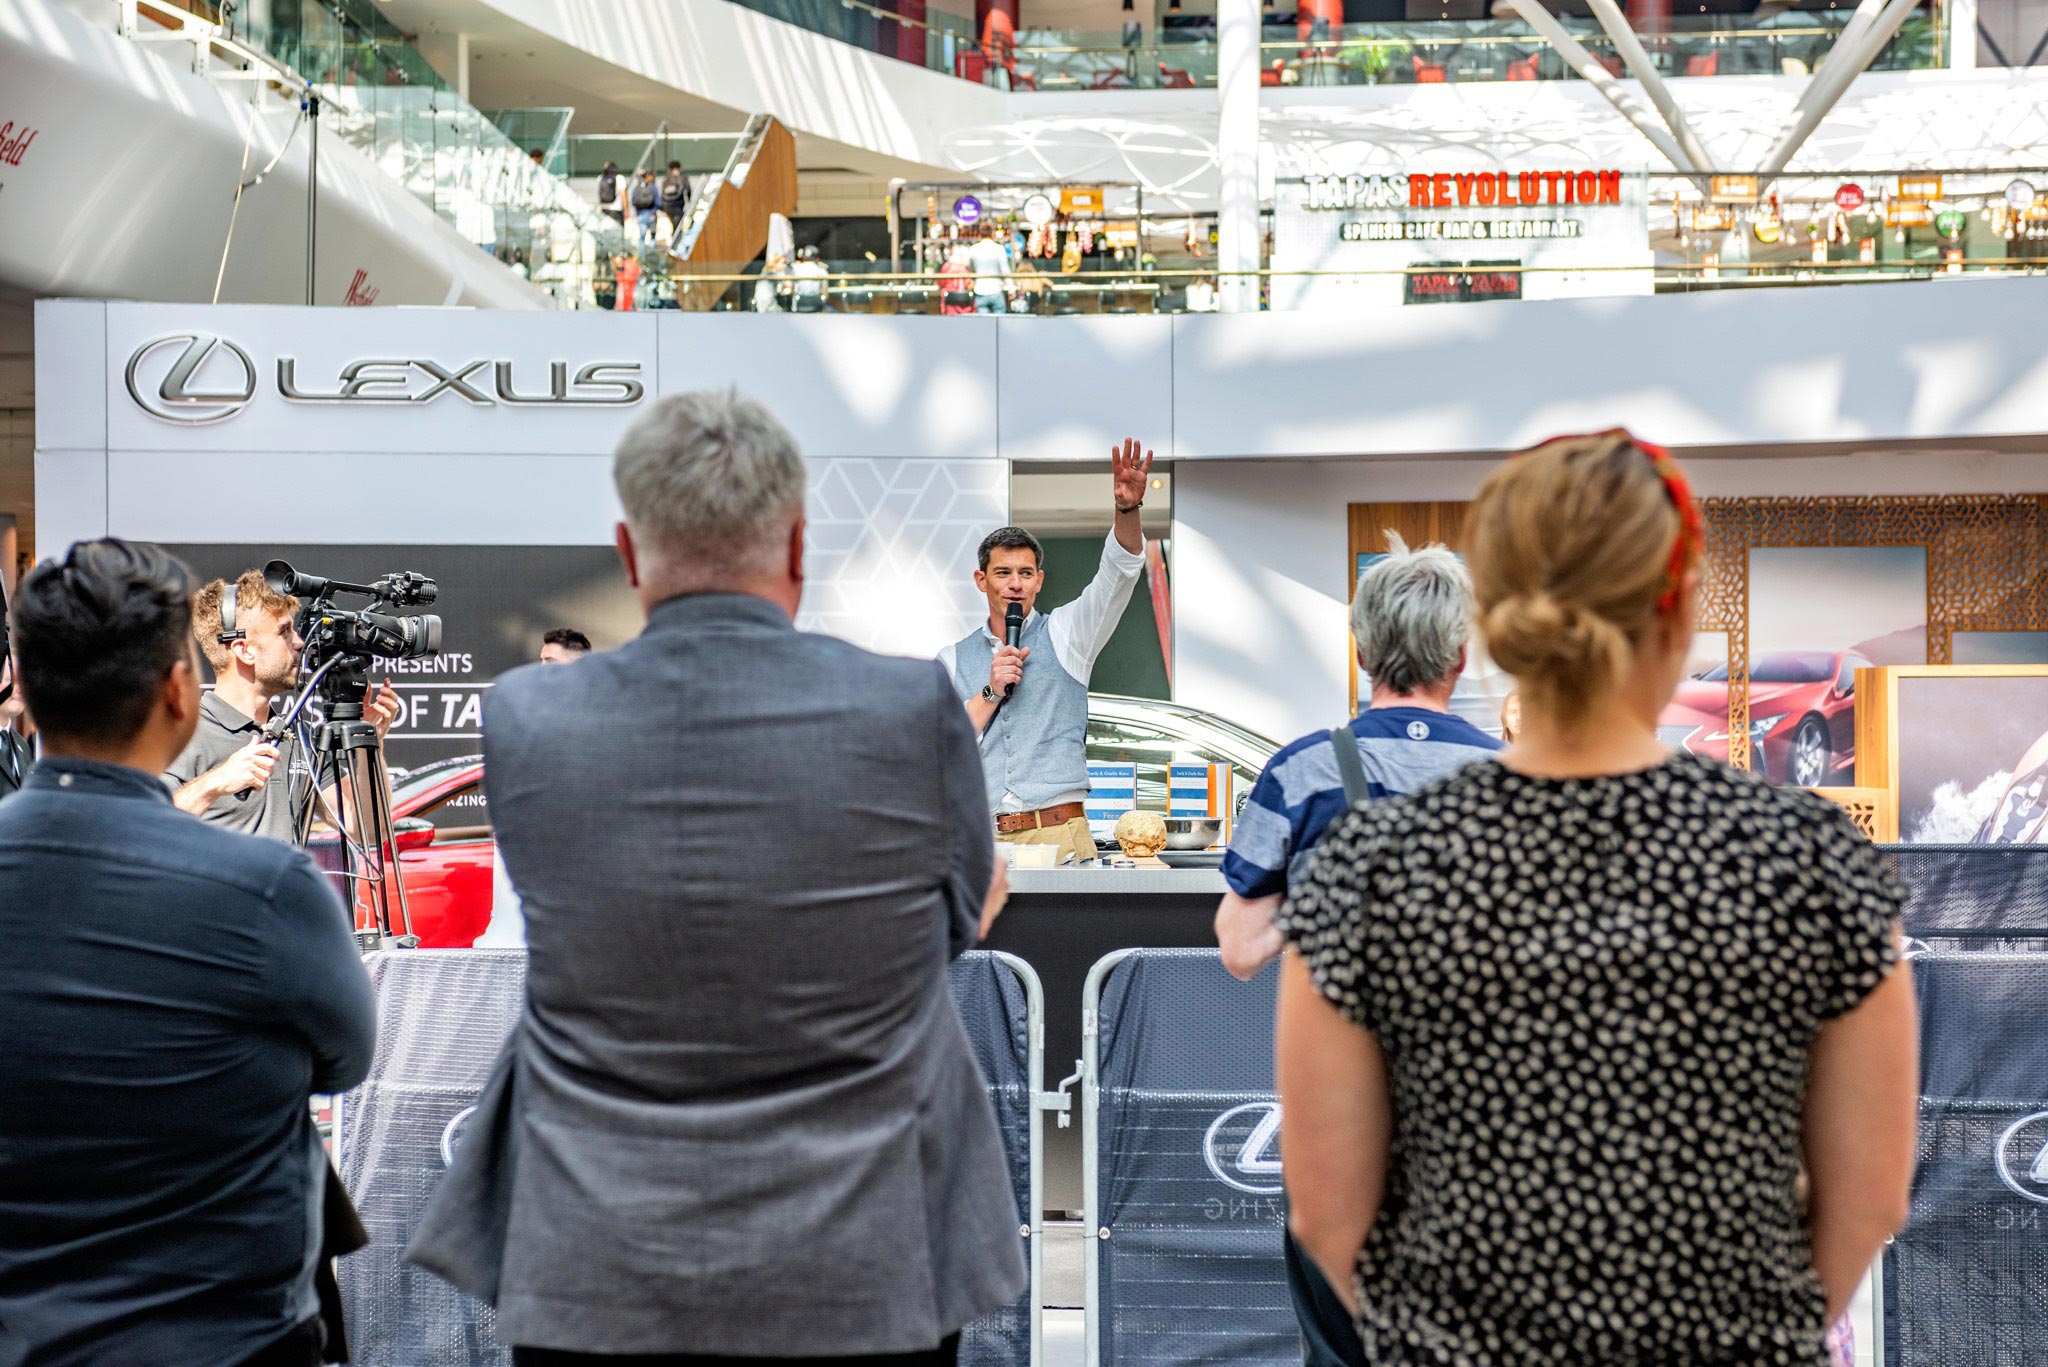 A captivating moment captured by Wright Content, showcasing Marcus Bean, a TV presenter chef, at an experiential event for Lexus. In this shot, Marcus waves to the audience while holding a microphone, adding to the excitement of the clocking demo. Wright Content specializes in production photography, expertly documenting behind-the-scenes moments like this.